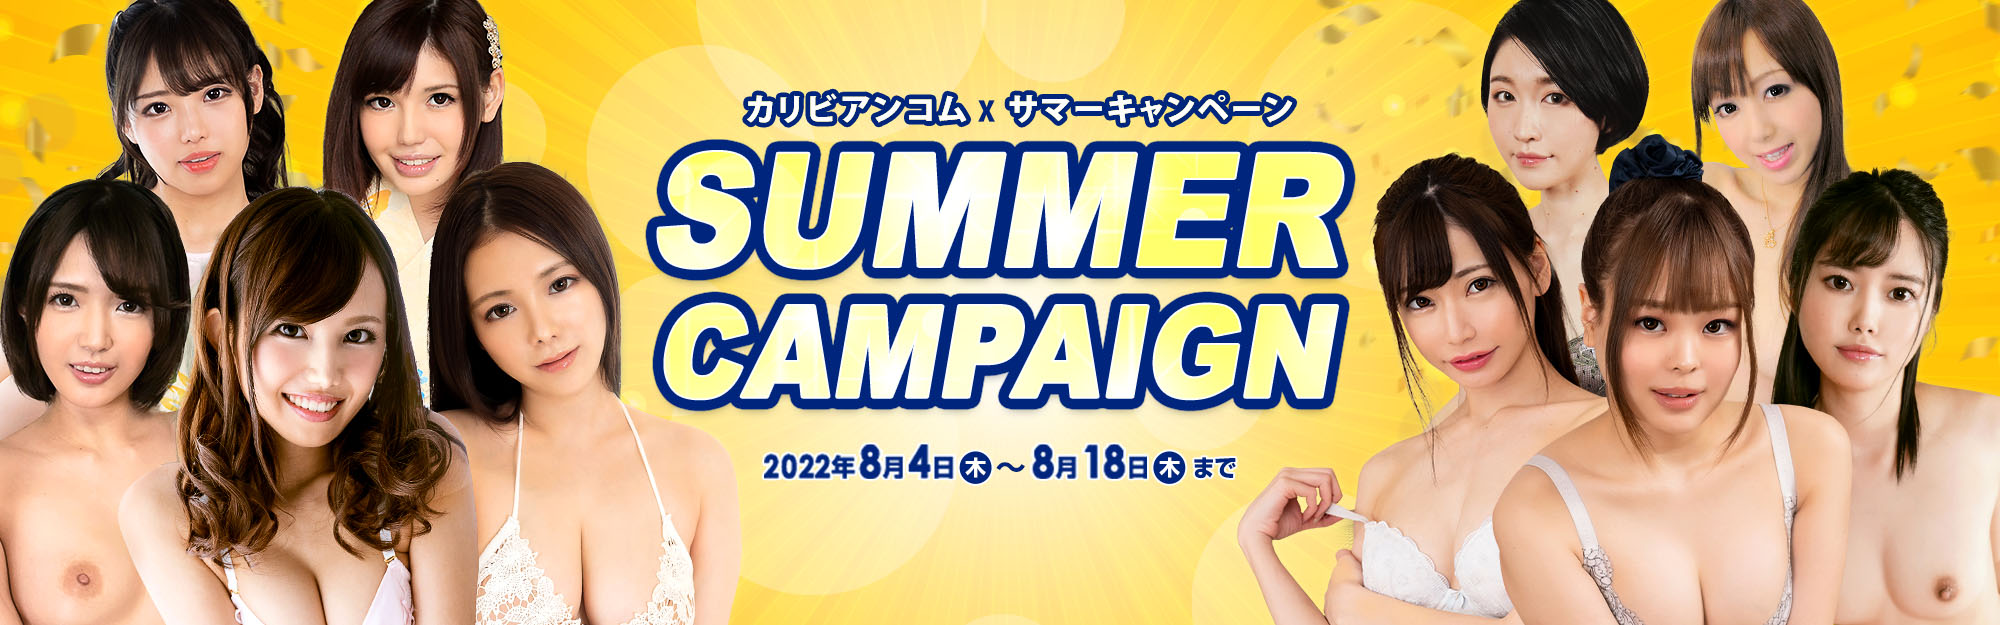 Summer Campaign 2022